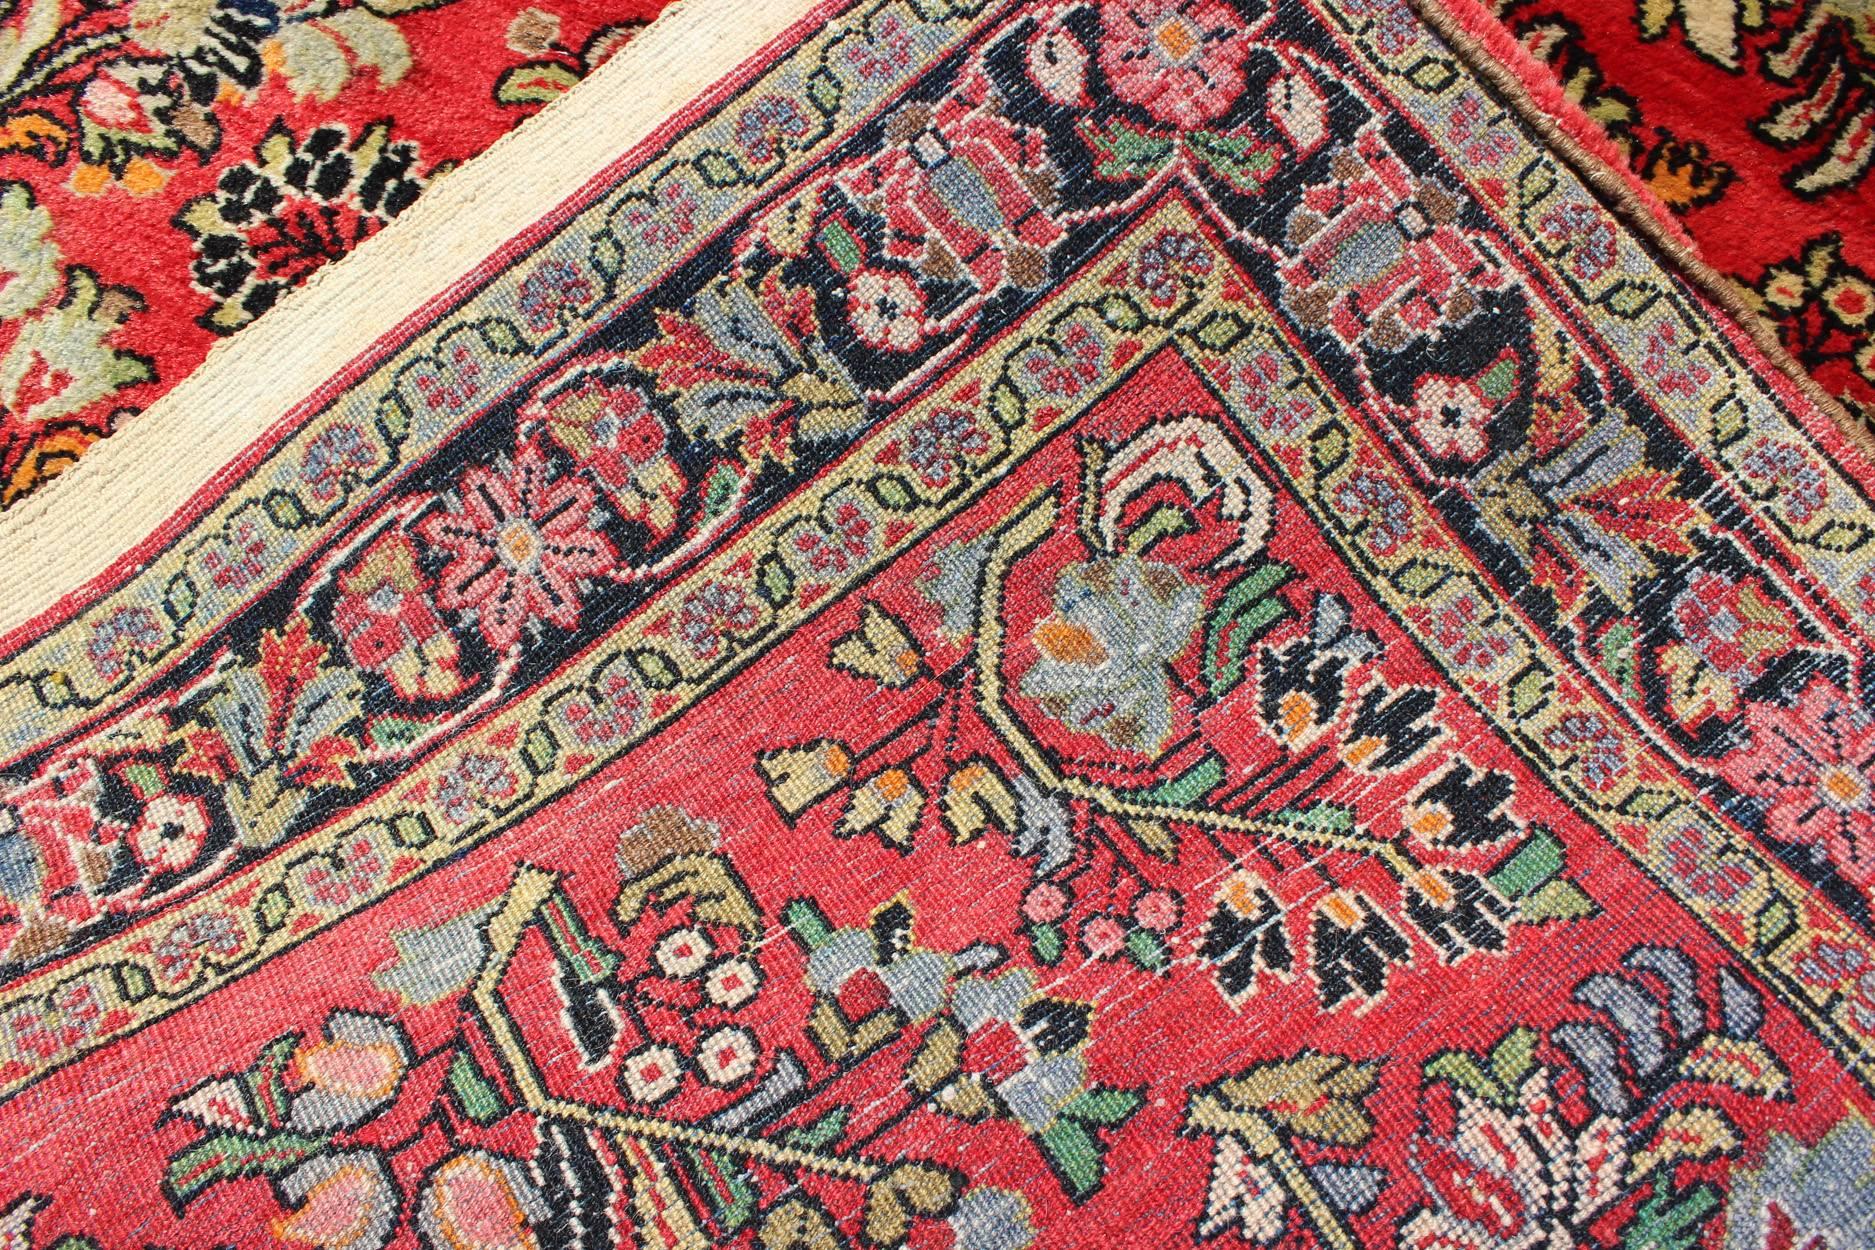 Wool Vintage Persian Sarouk Rug with All-Over Floral Design in Rich Red, Onyx Black For Sale